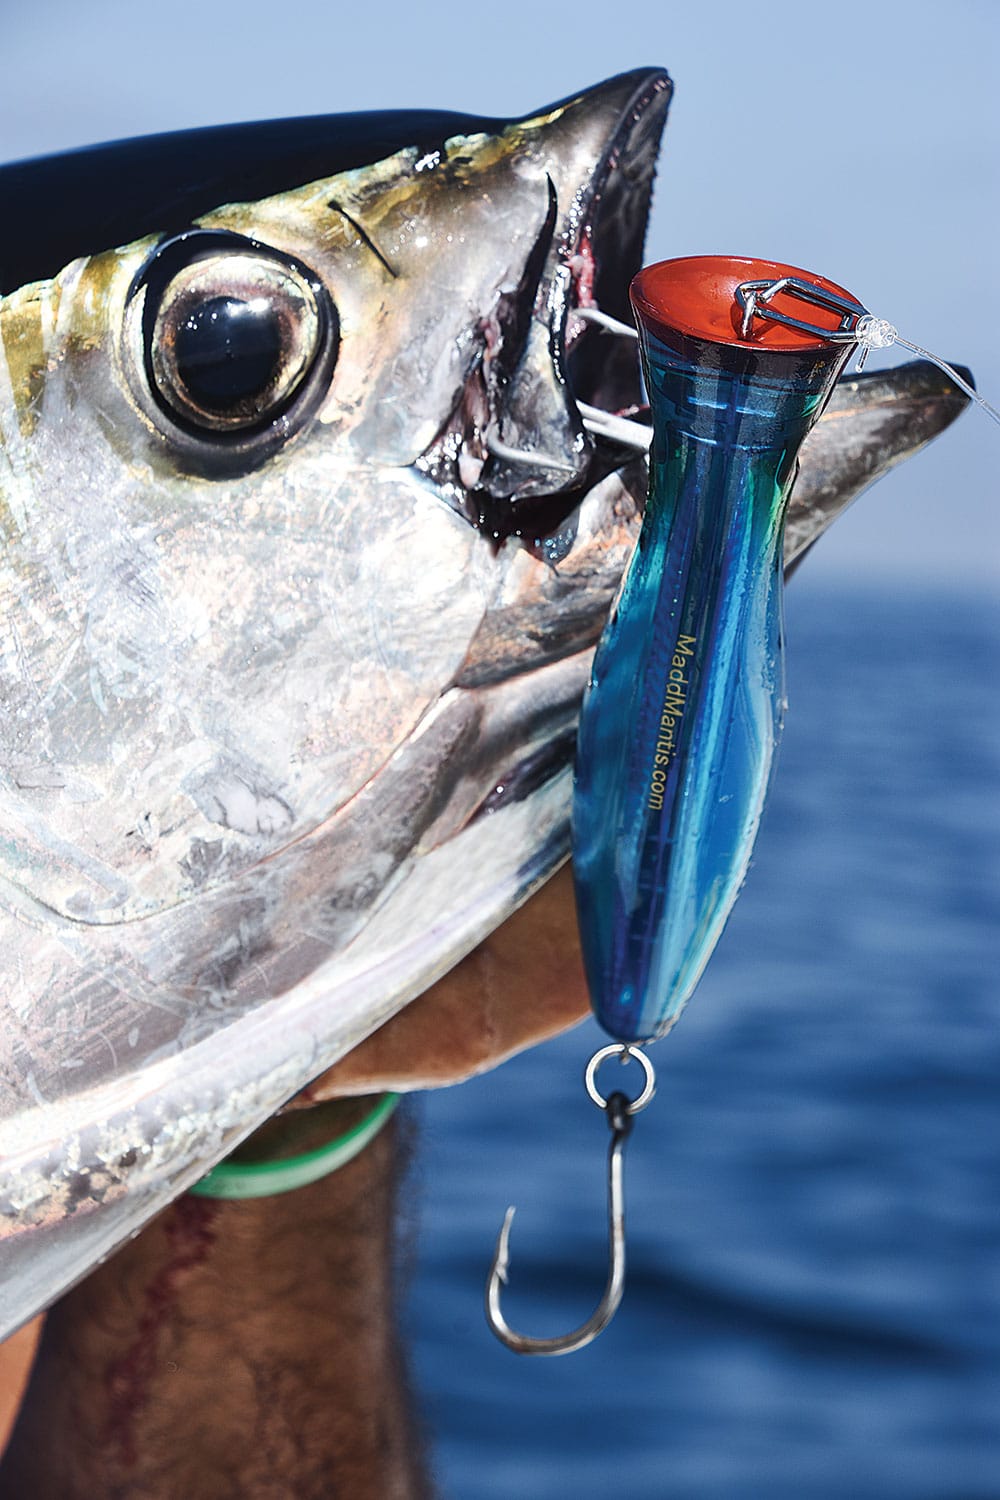 Got a bite every cast! What is there to know about this lure? : r